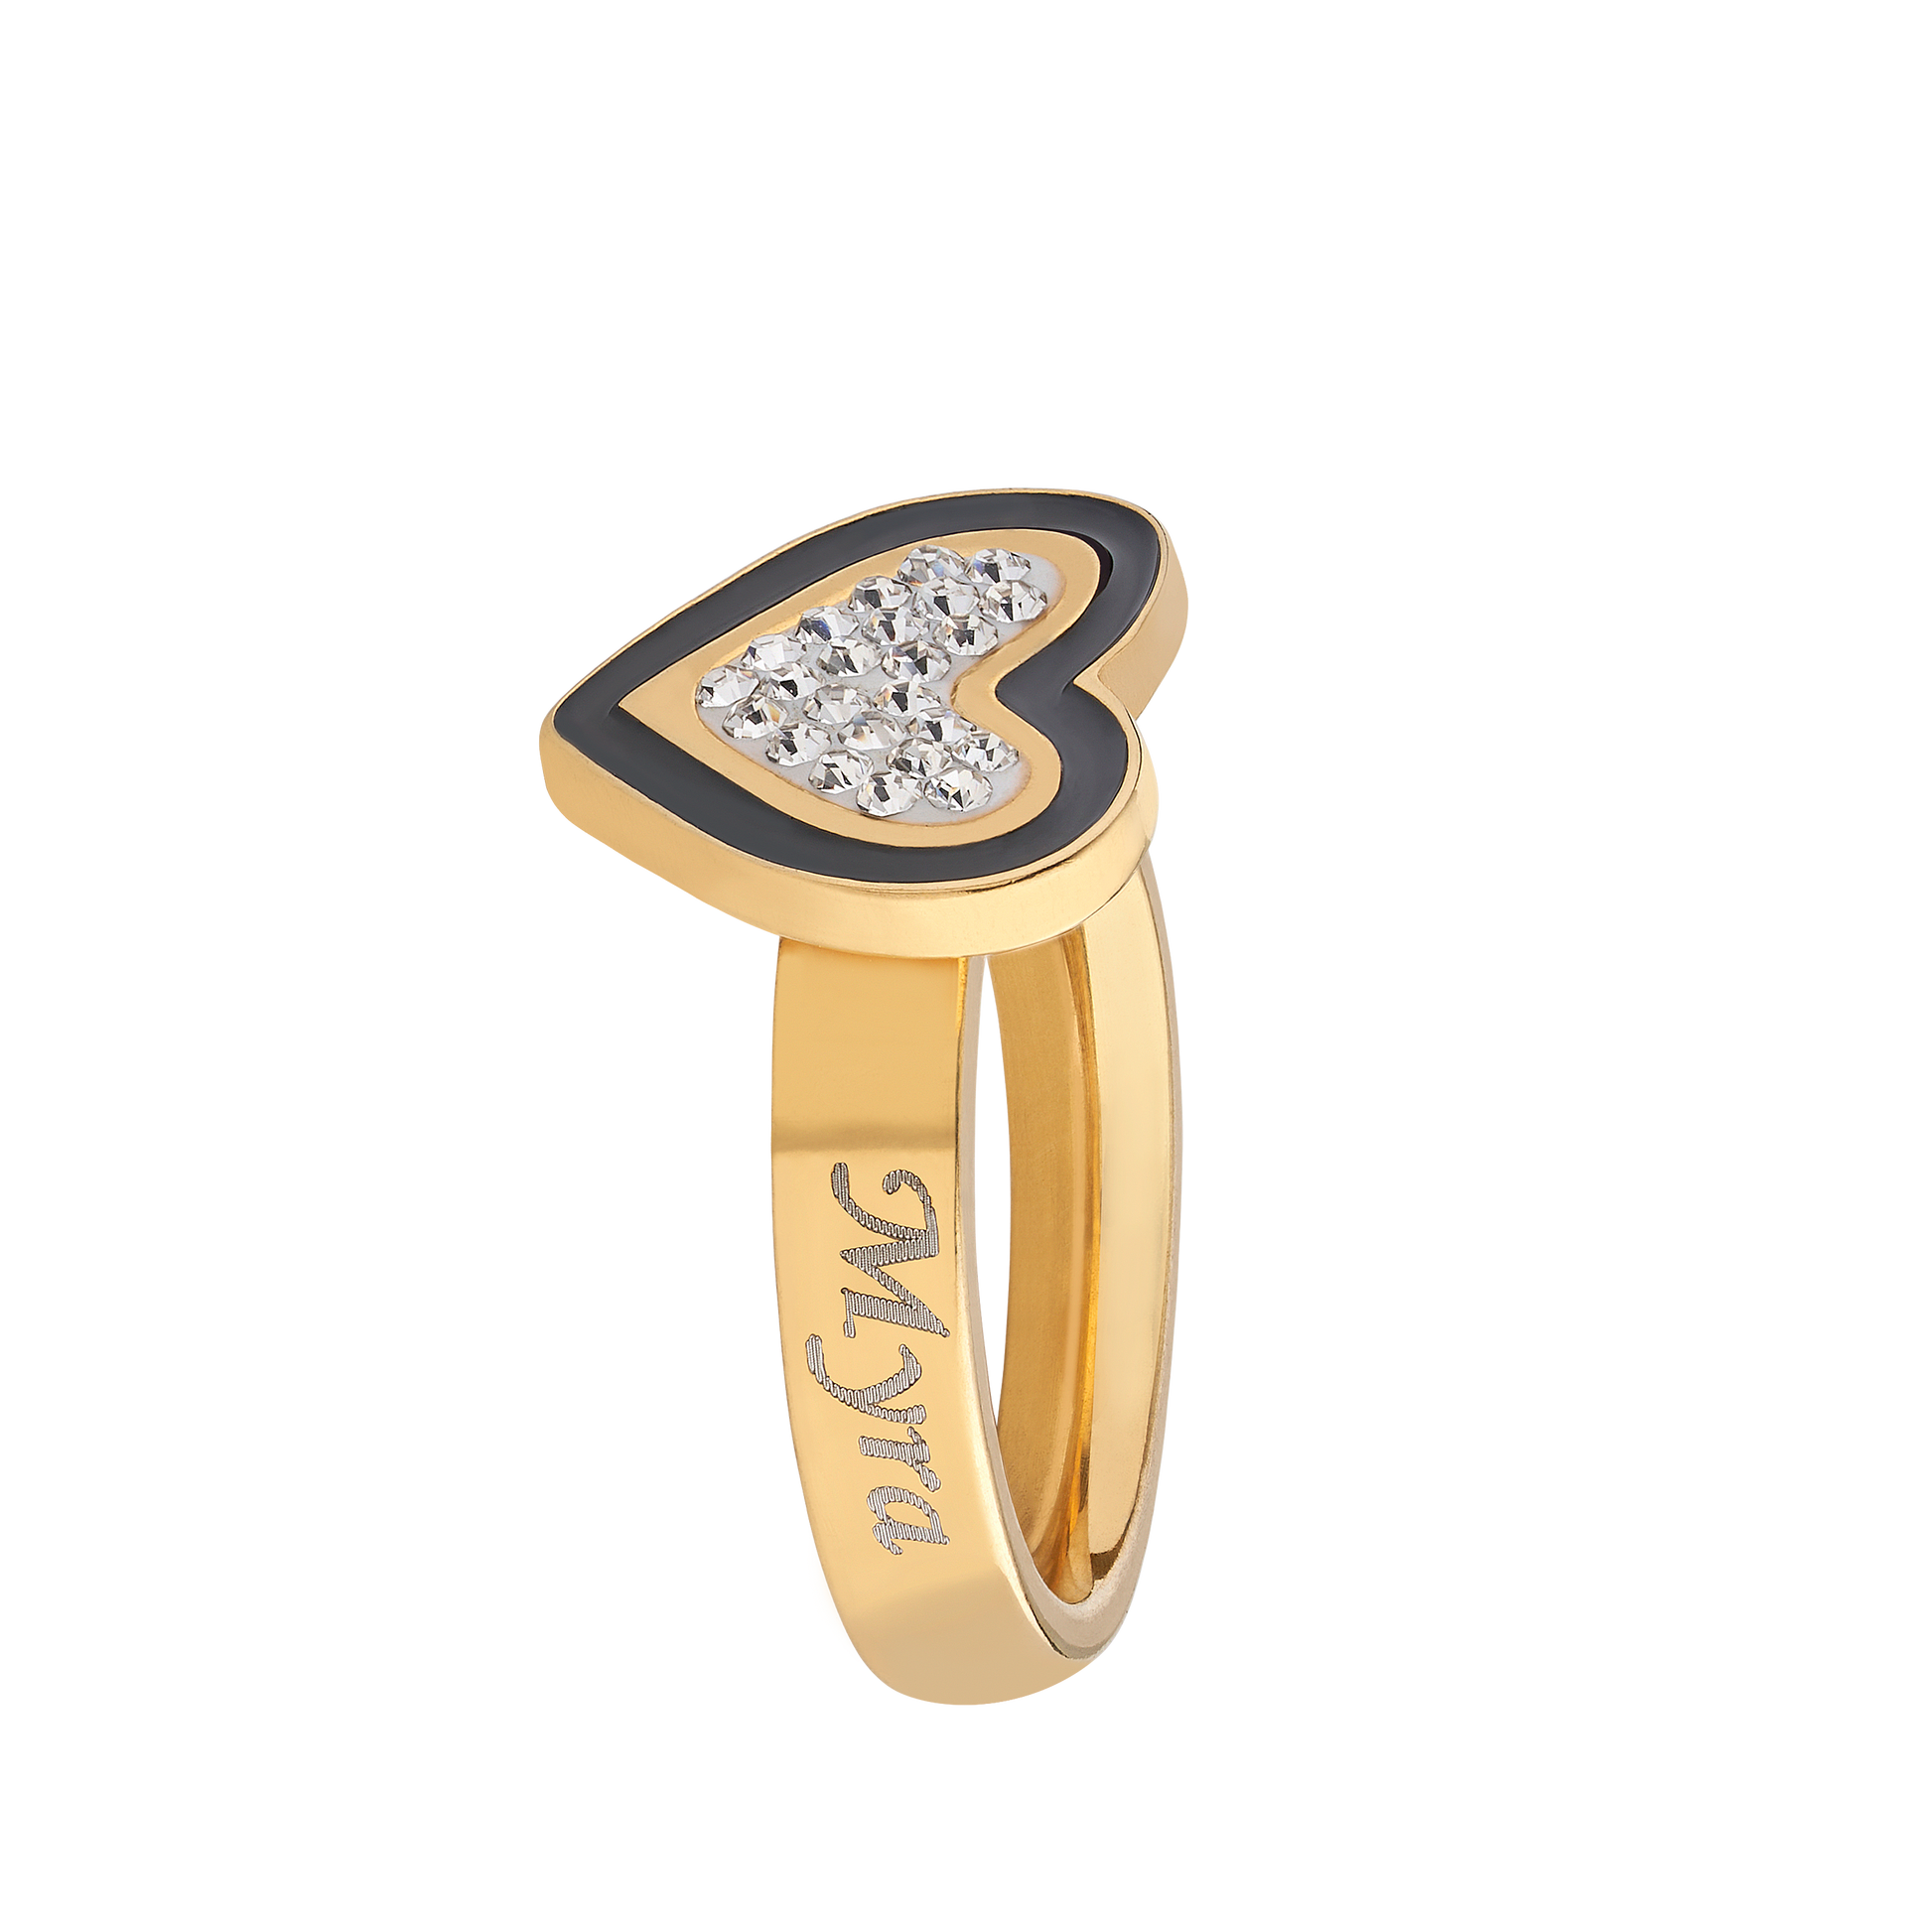 Gold Rings for Women: Shop our Stunning Collection of Gold Rings for Women in a Variety of Styles and Sizes | Zestpics